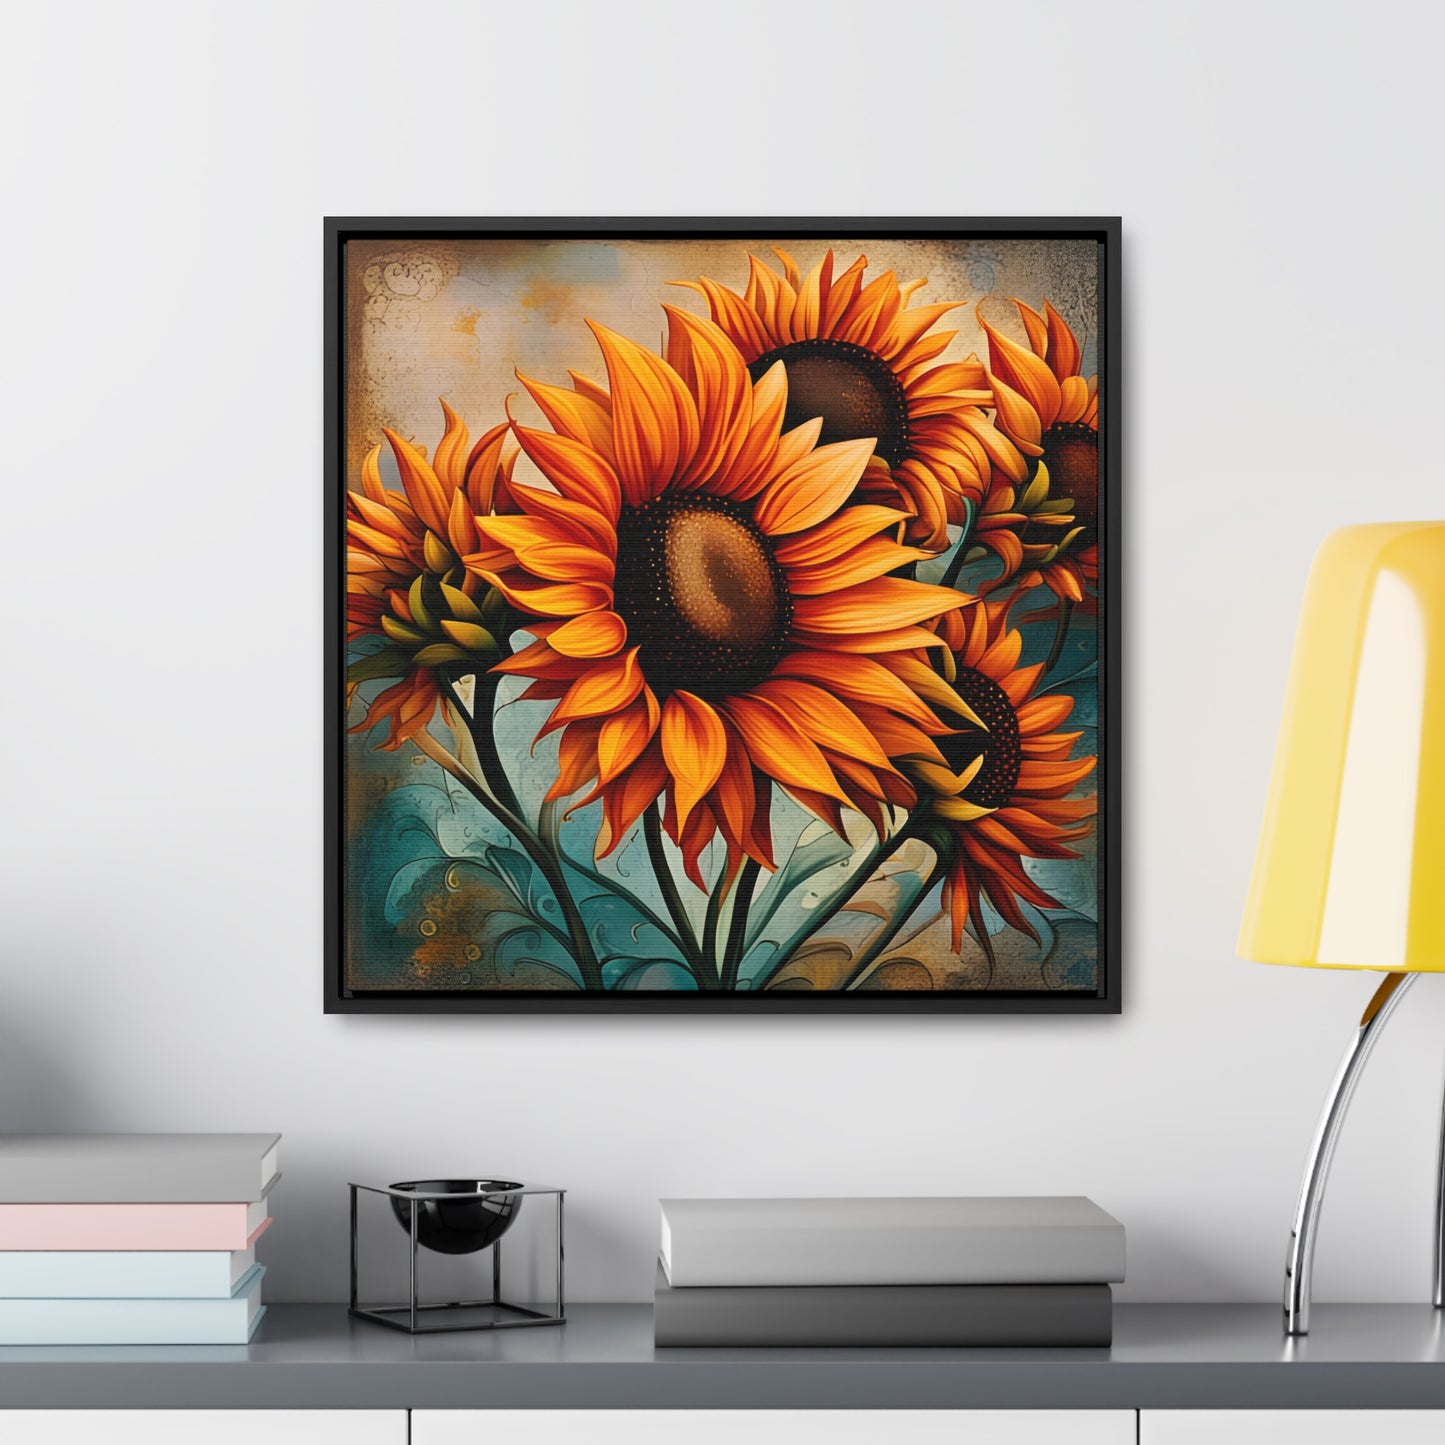 Sunflower Lovers Delight - Sunflower Crop on Distressed Blue and Copper Background Printed on Canvas in a Floating Frame 20x20